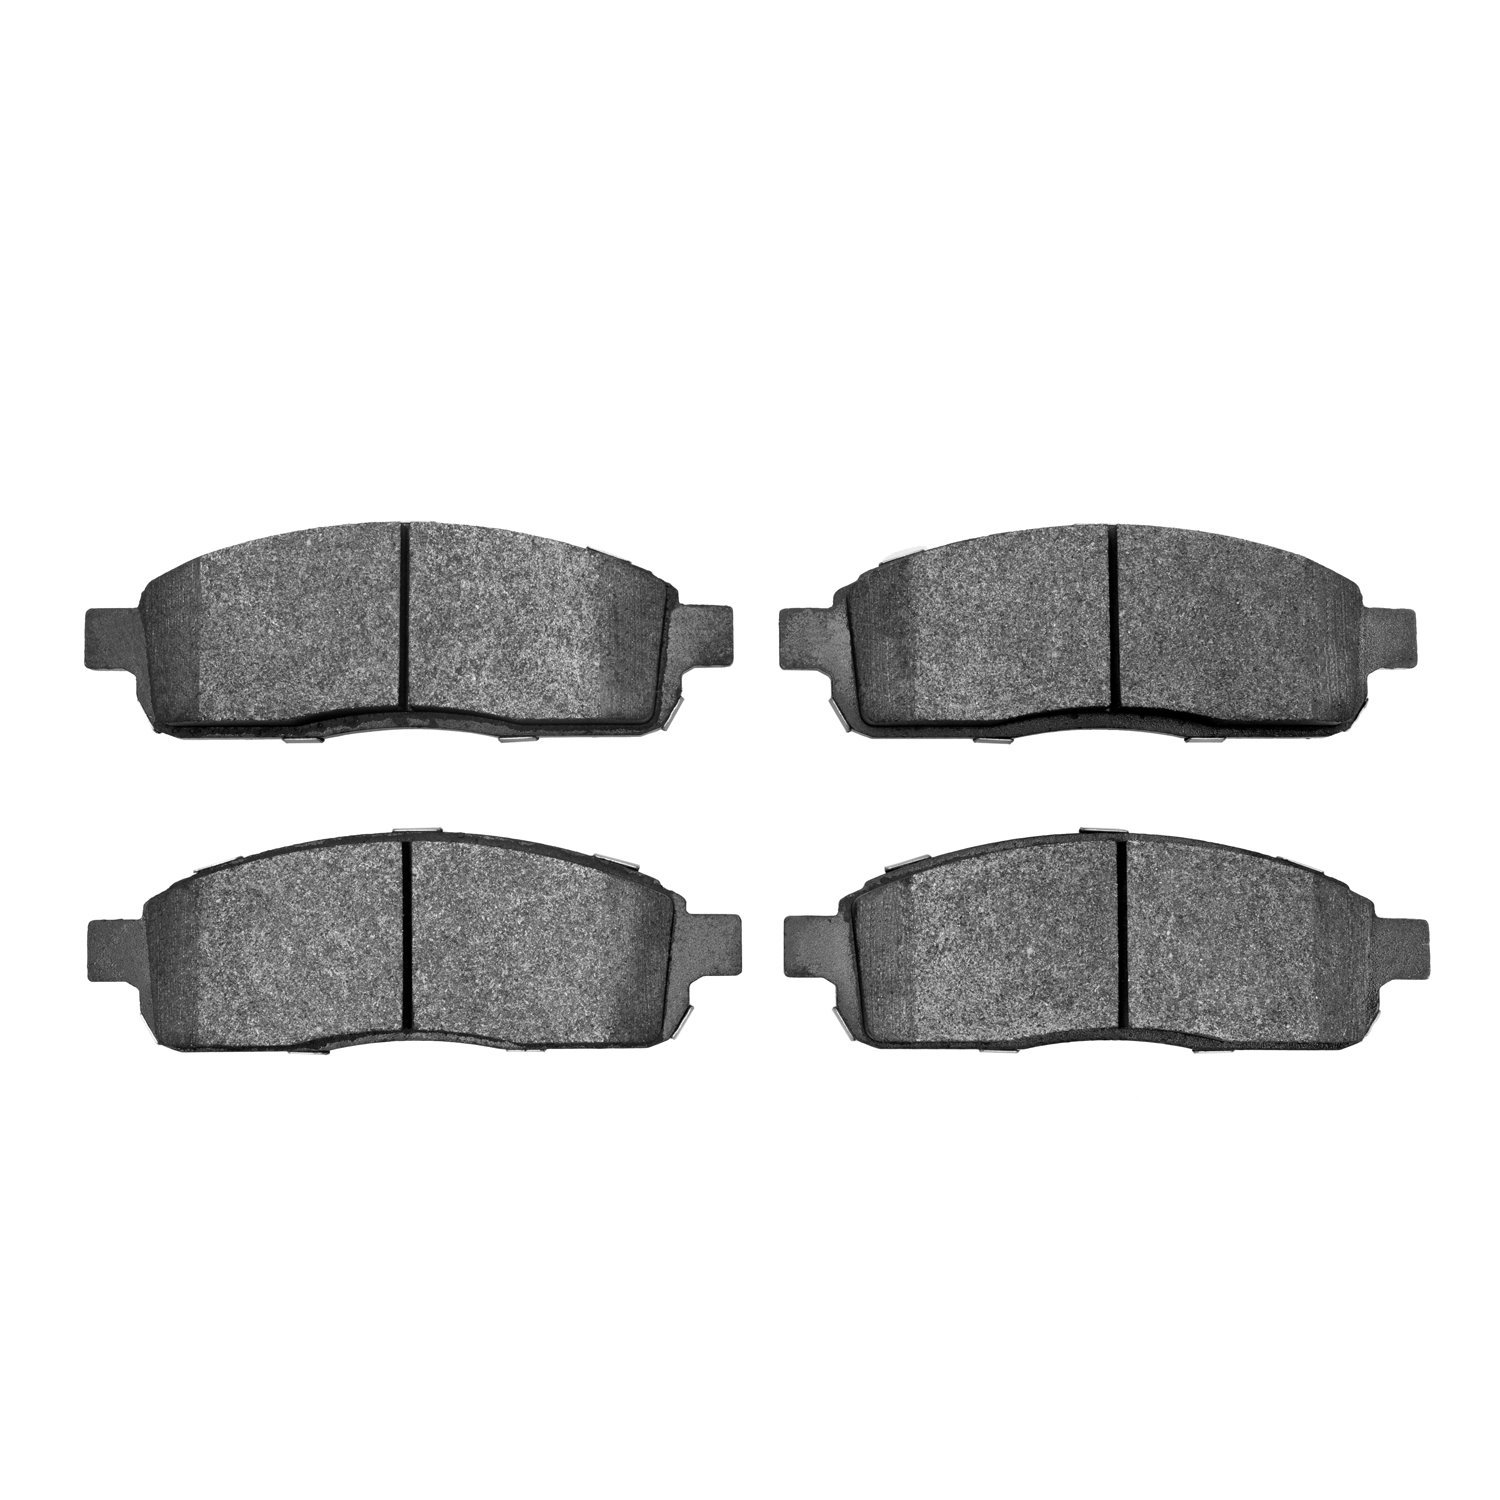 Super-Duty Brake Pads, 2004-2009 Ford/Lincoln/Mercury/Mazda, Position: Front